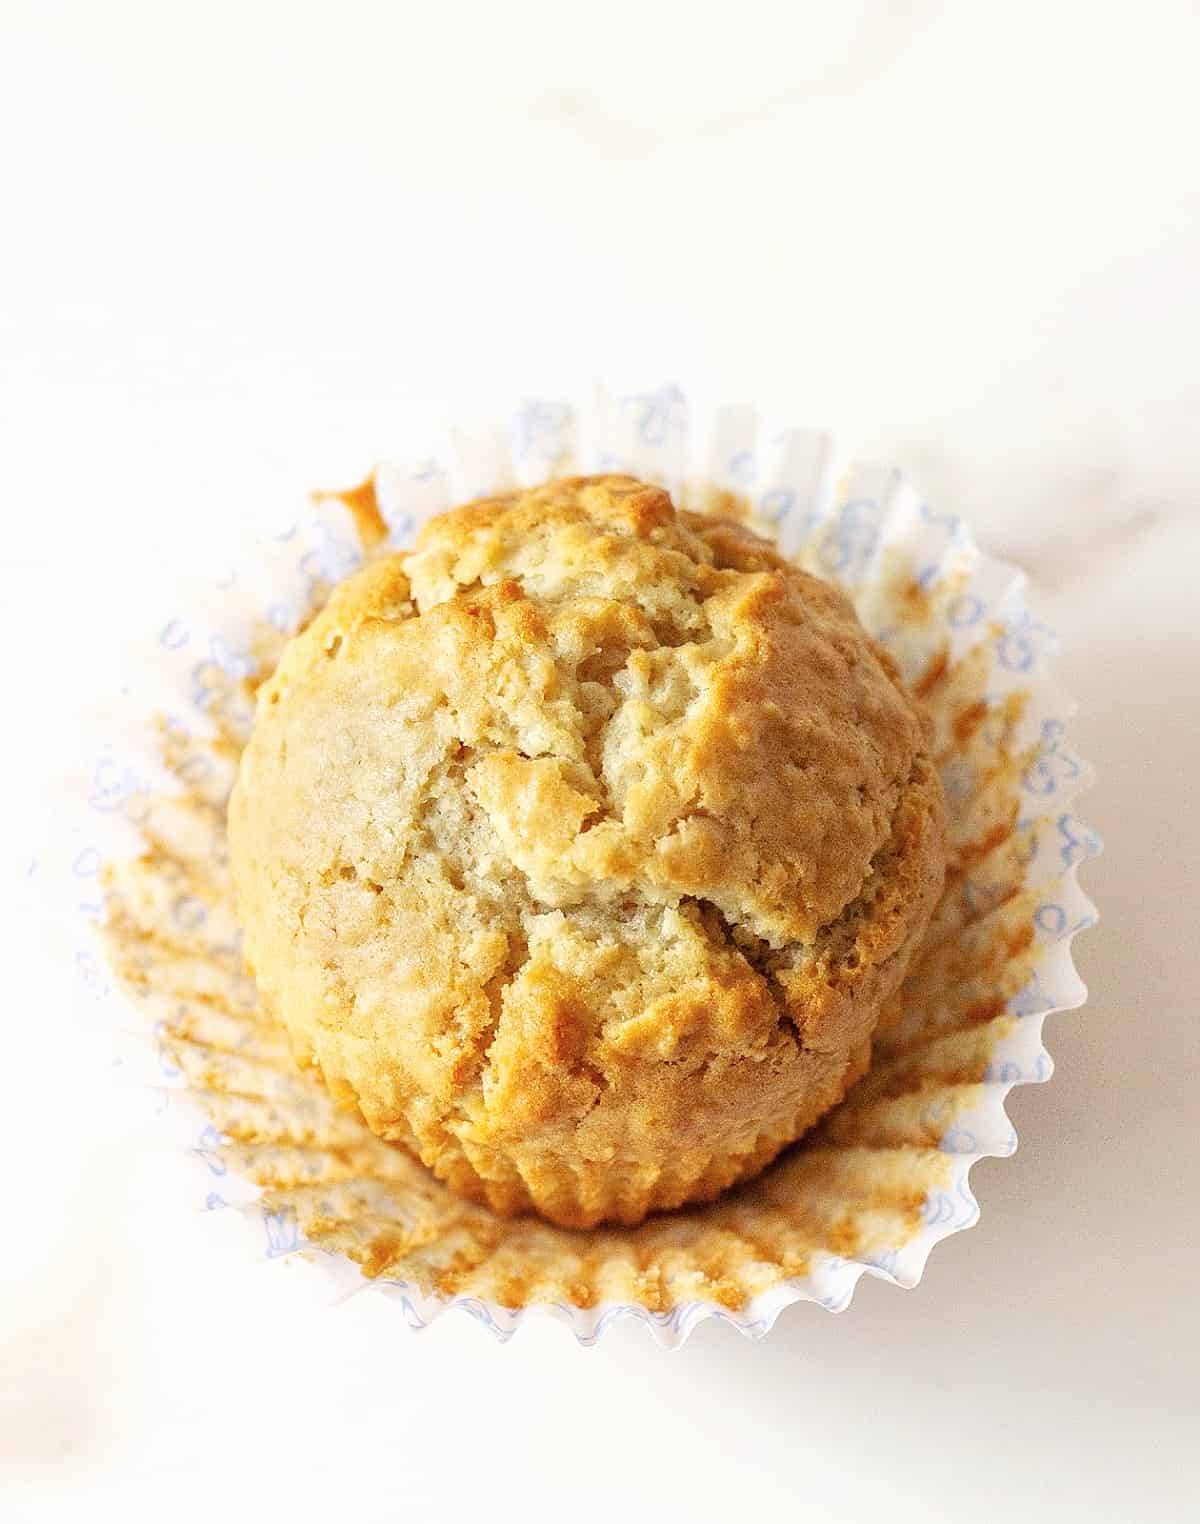 One golden colored muffin on an opened whitish paper cup, white surface.